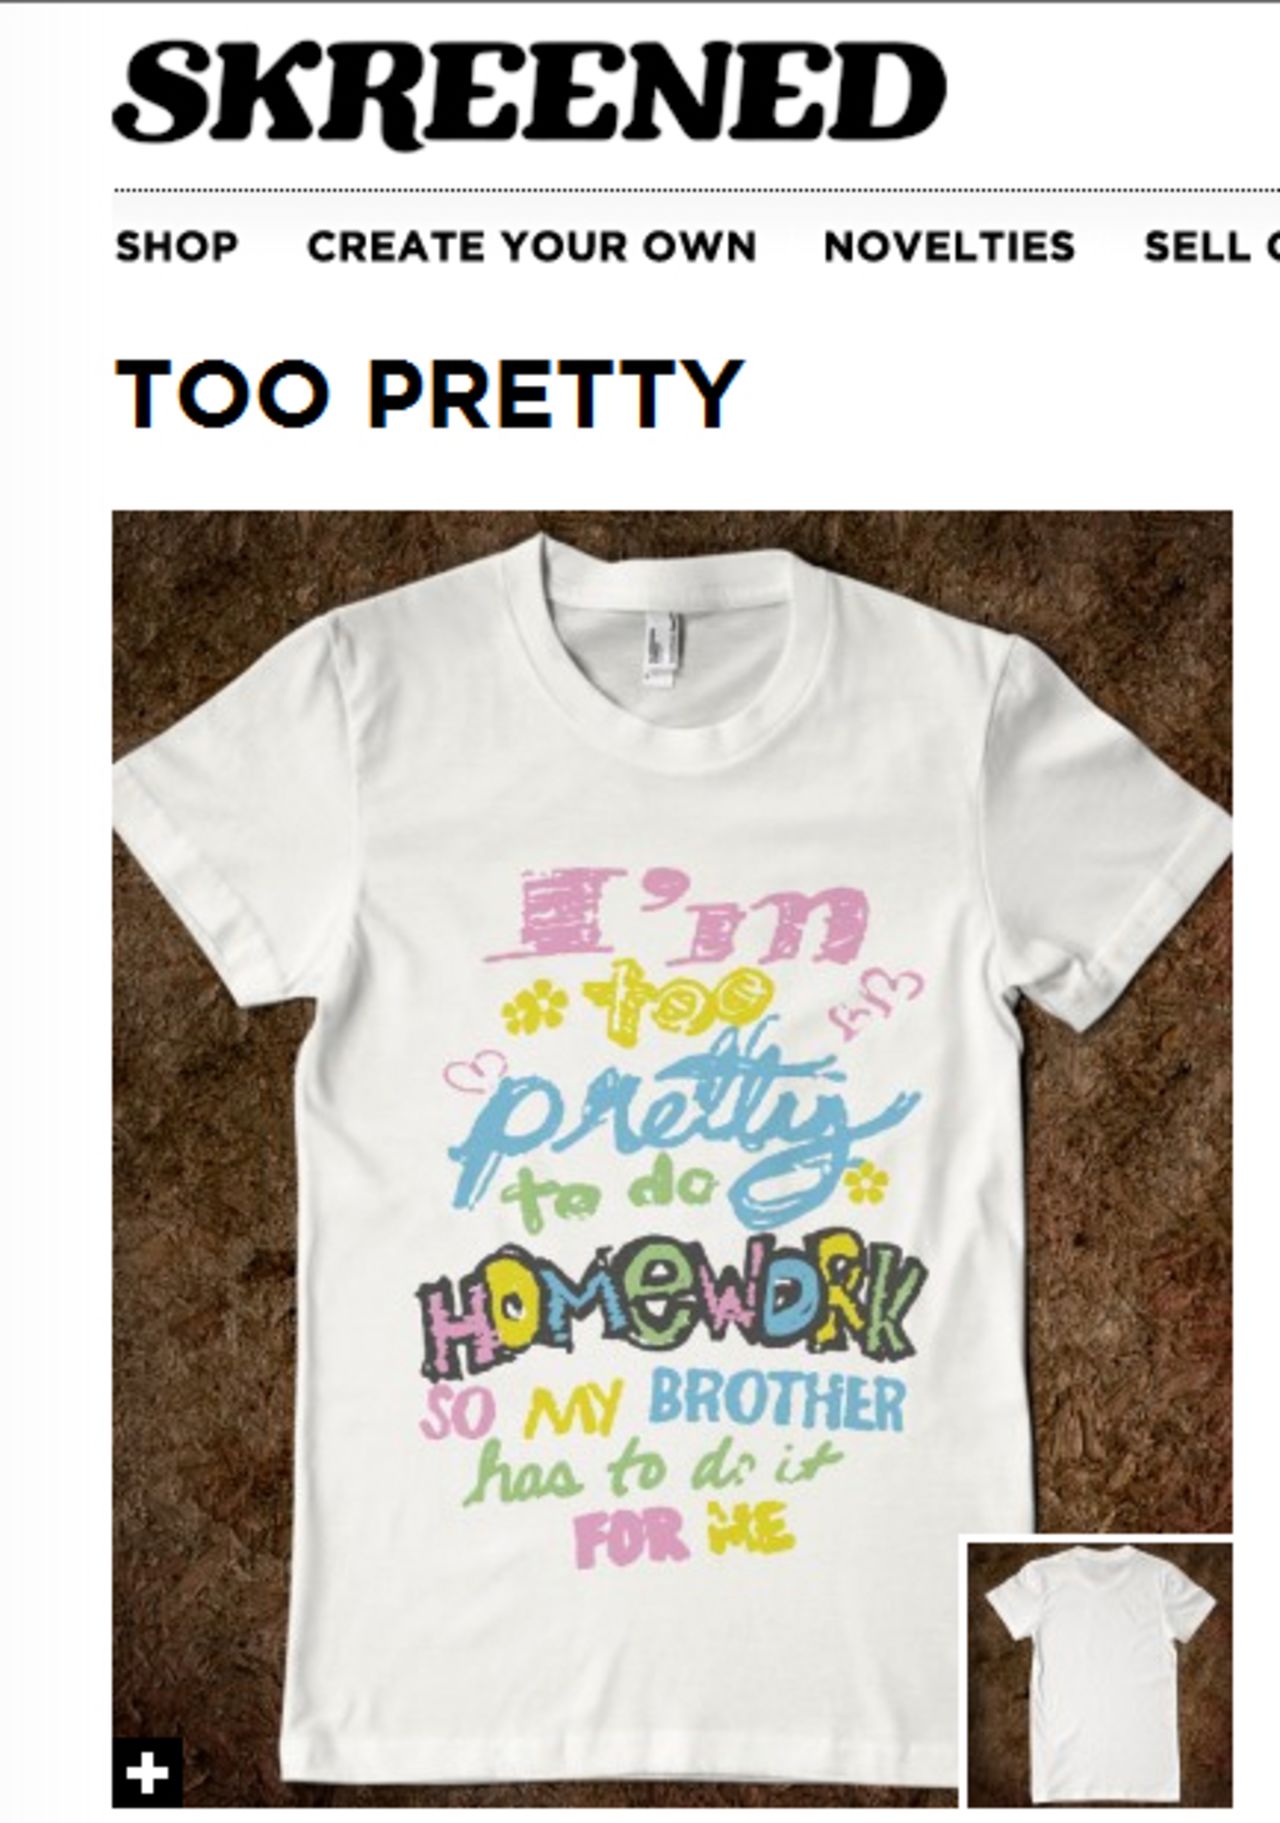 The infamous "I'm too pretty to do homework so my brother has to do it for me," T-shirt for tween girls was <a href="http://newsroom.blogs.cnn.com/2011/09/01/former-blossom-star-speaks-out-about-controversial-t-shirts/" target="_blank">pulled from J.C. Penney's stores</a> after consumers began to complain about the slogan's blatant sexism. 